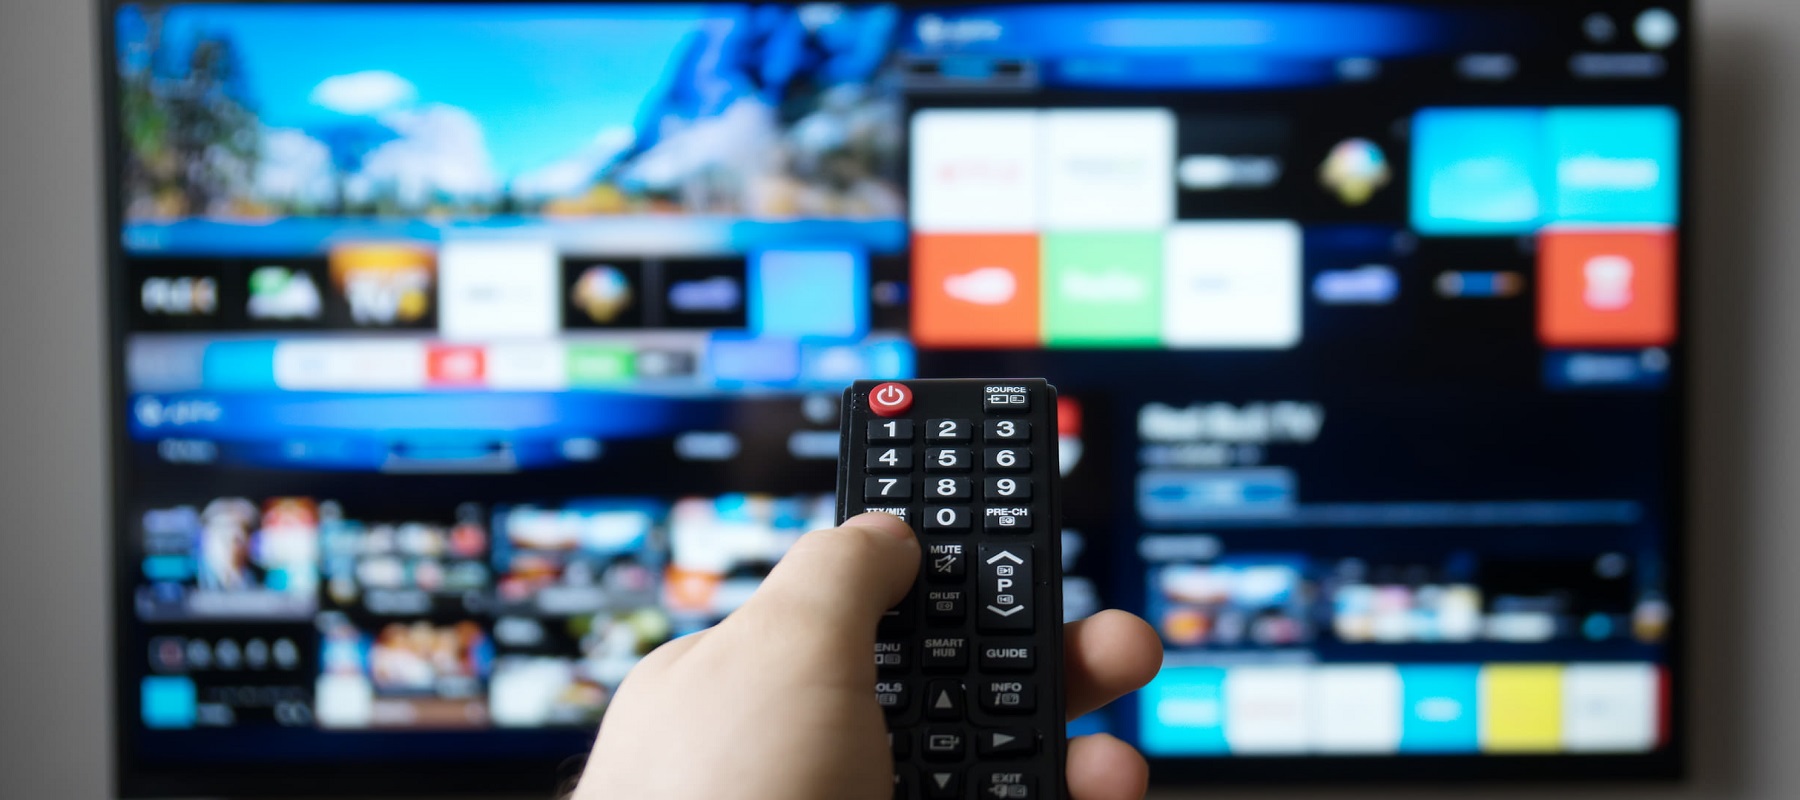 Consumers pay four times more attention to CTV ads when they are contextually targeted with AI, report